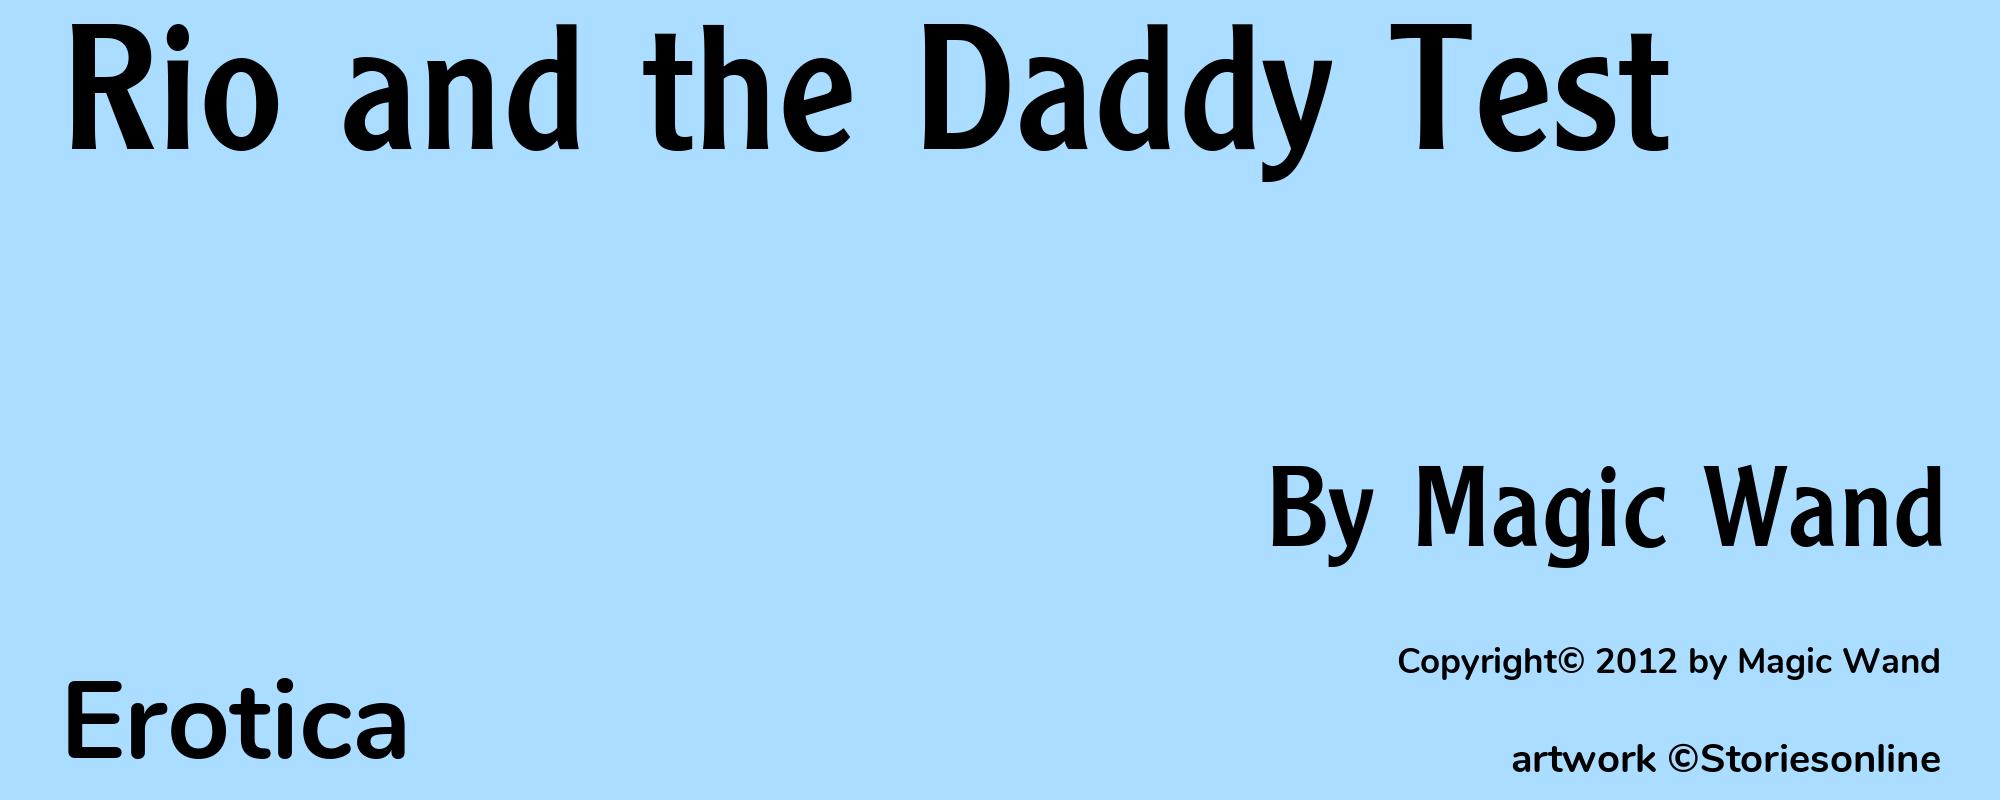 Rio and the Daddy Test - Cover